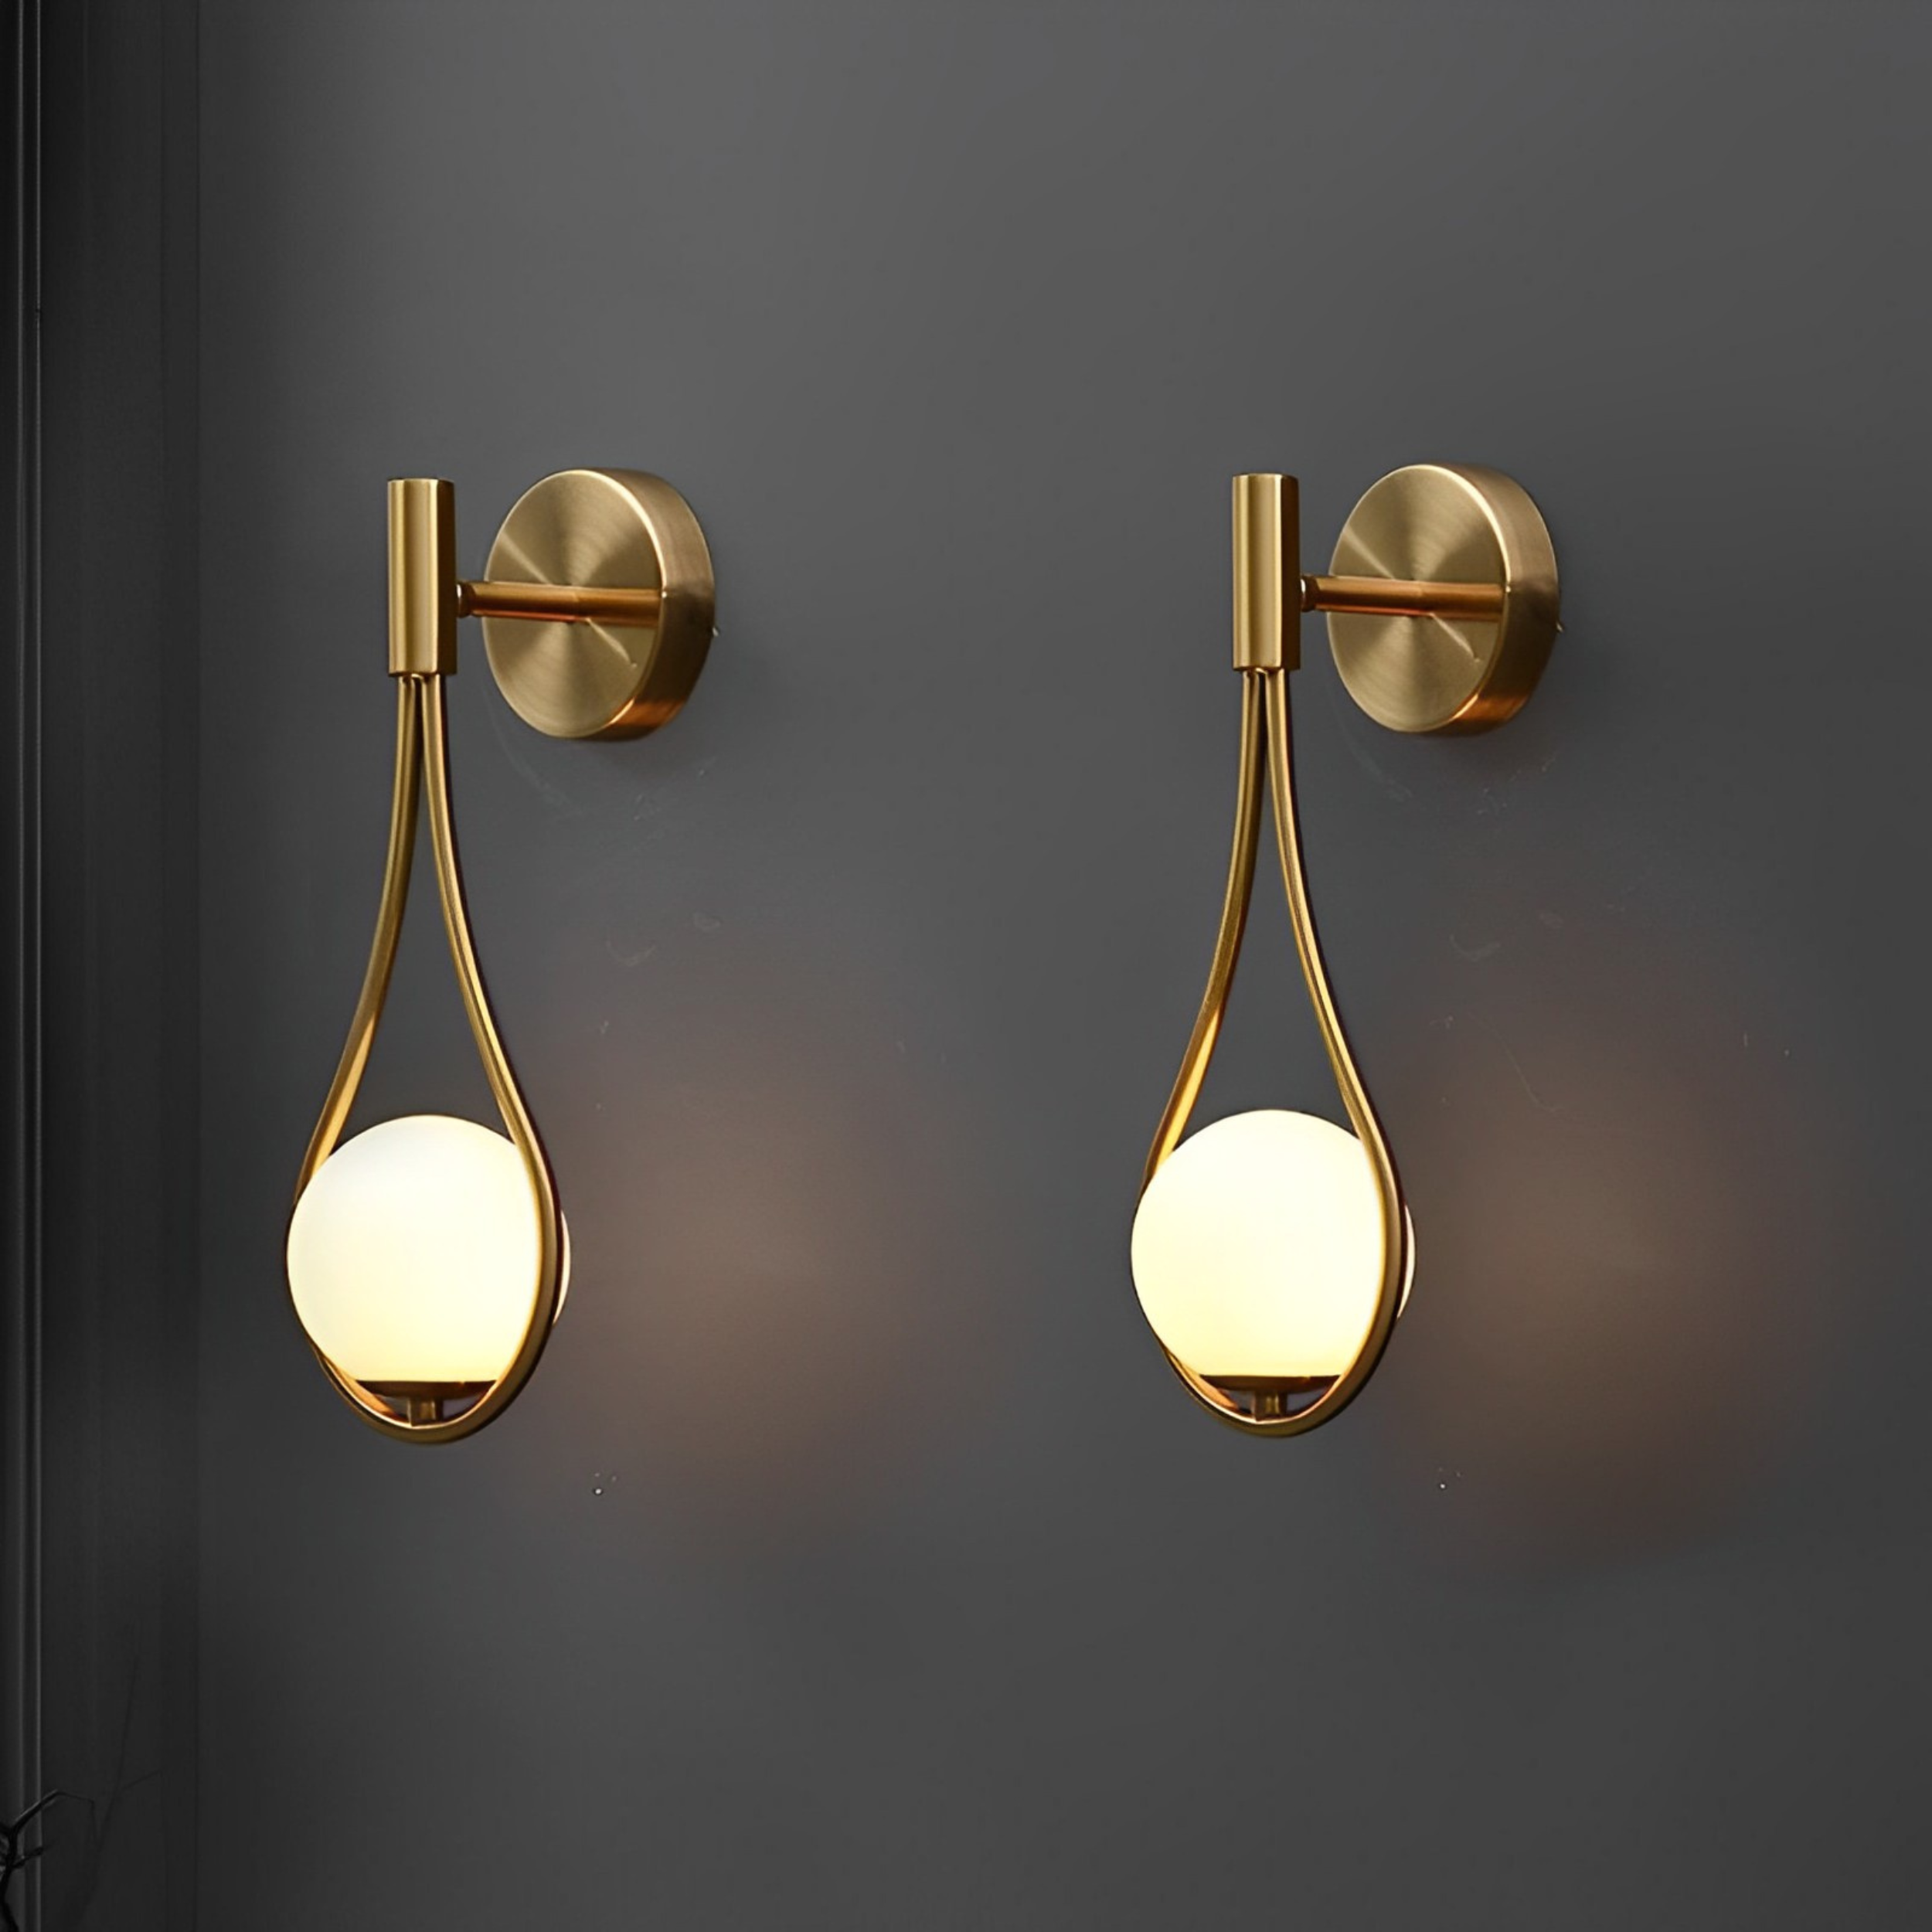 WL-B0035 Nordic Metal Glass Led Wall Sconce Lighting Modern E14 Wall Mounted Light Fixture Brass White Lamp Creative Staircase Bedside Lamp, bedroom, Corridor, Hallway (Single Piece)